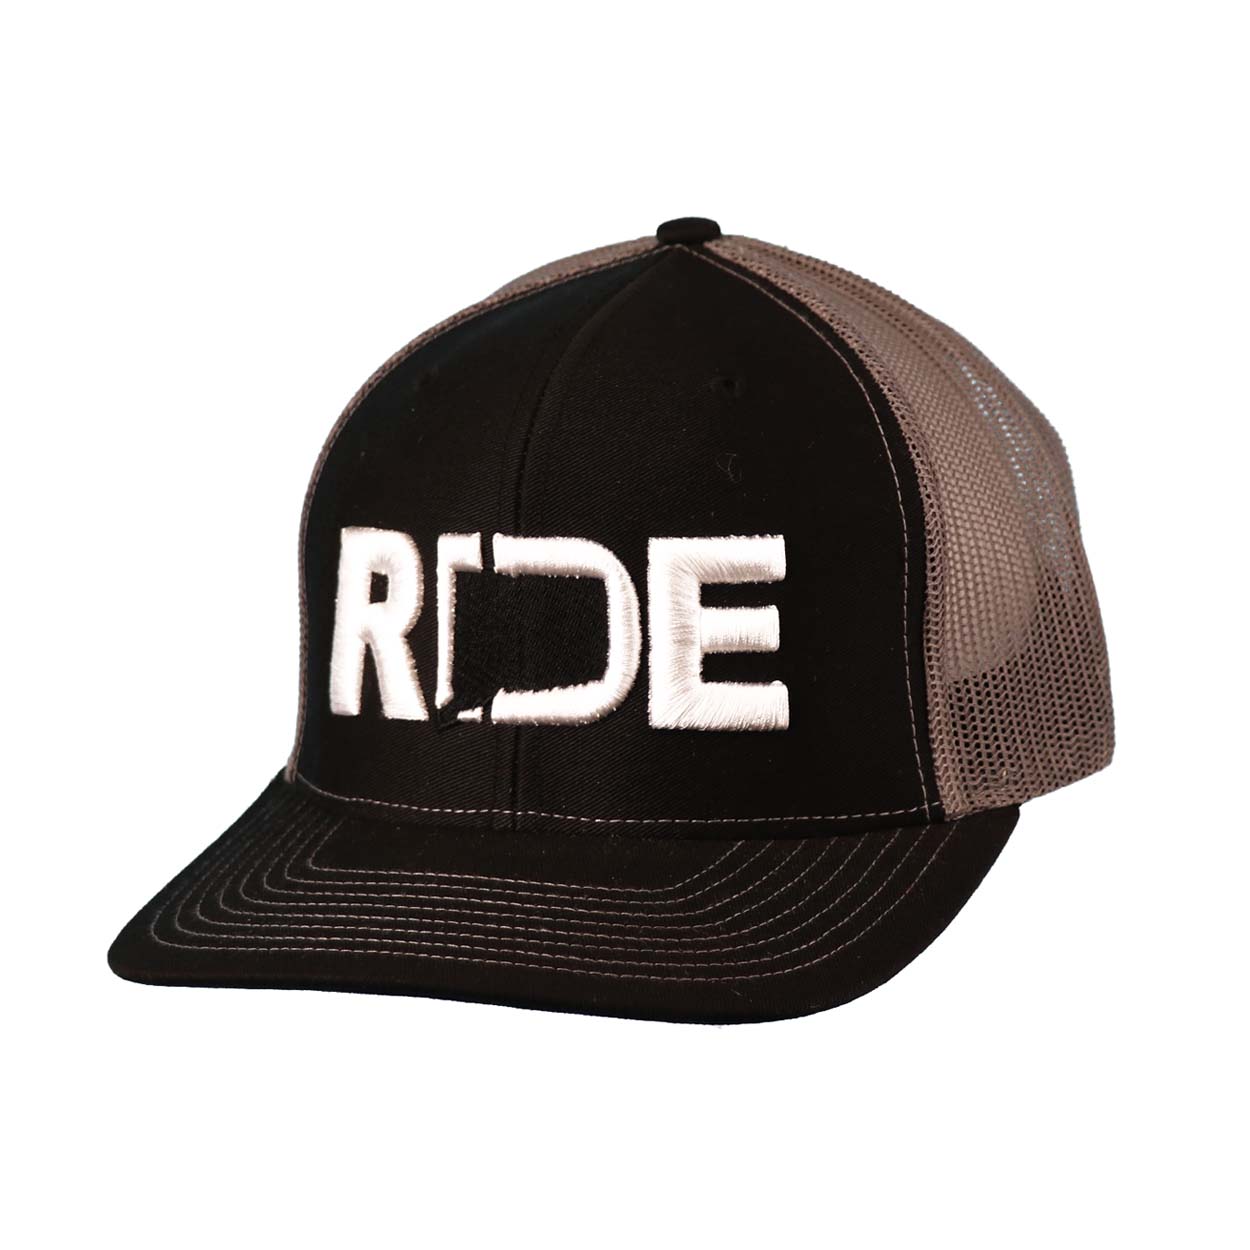 Ride Connecticut Classic Pro 3D Puff Embroidered Snapback Trucker Hat Black/Gray